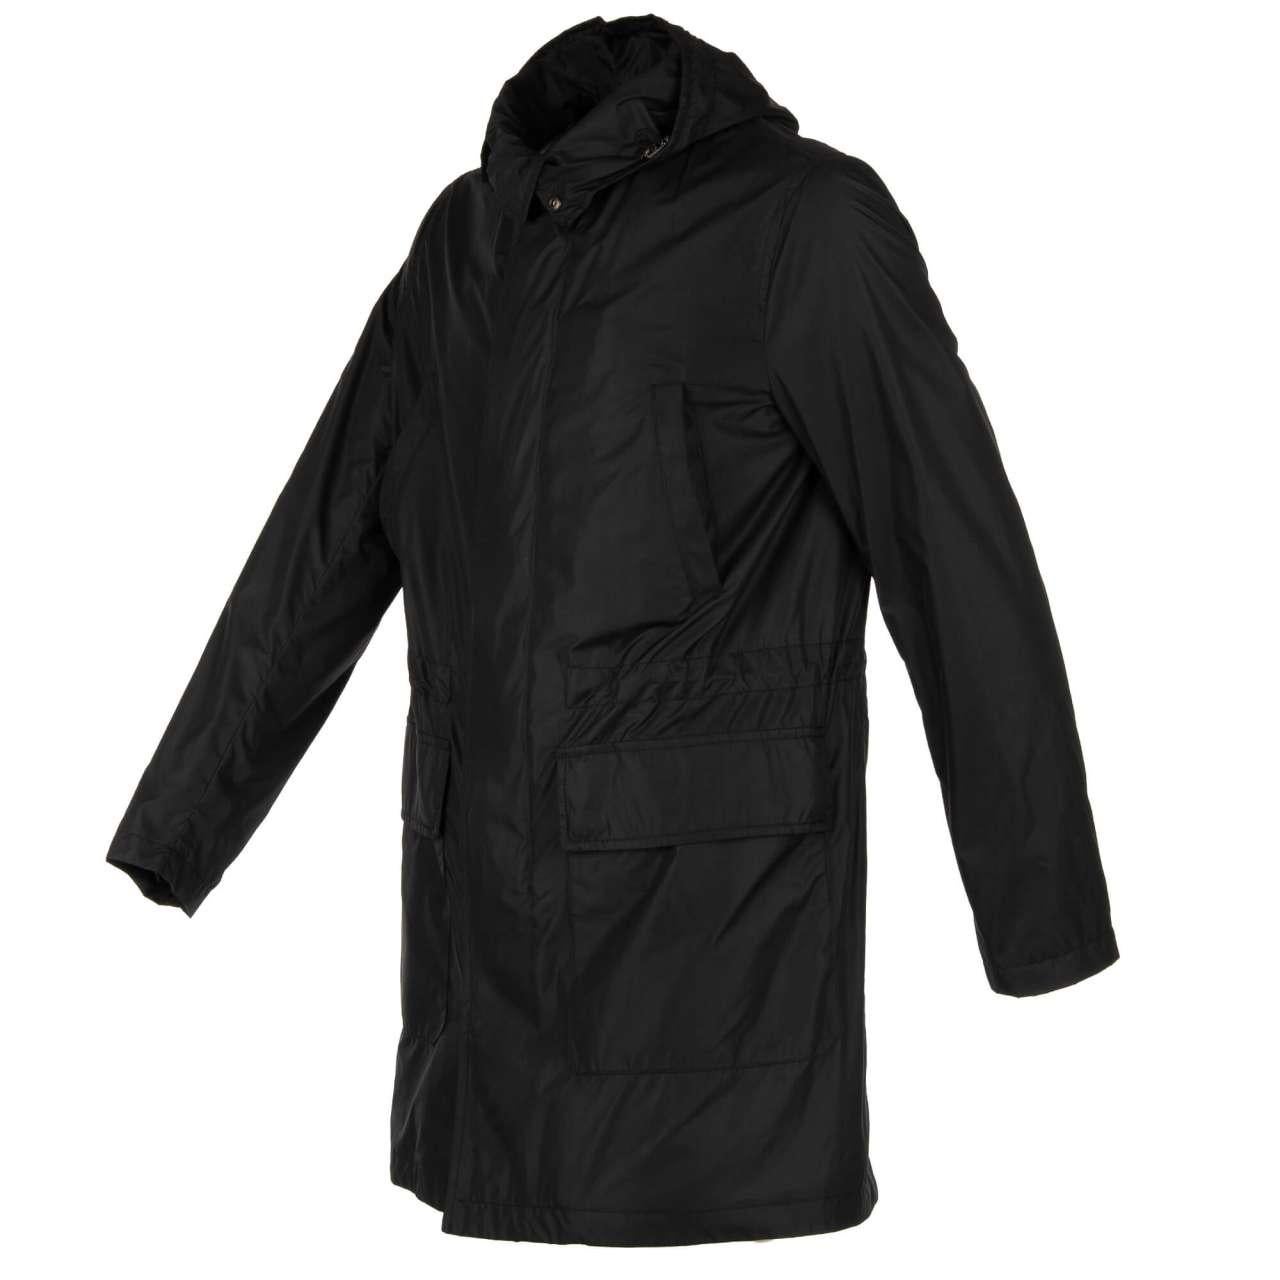 Dolce & Gabbana Classic Rain Parka Jacket with Pockets and Hoody Black 44 In Excellent Condition For Sale In Erkrath, DE